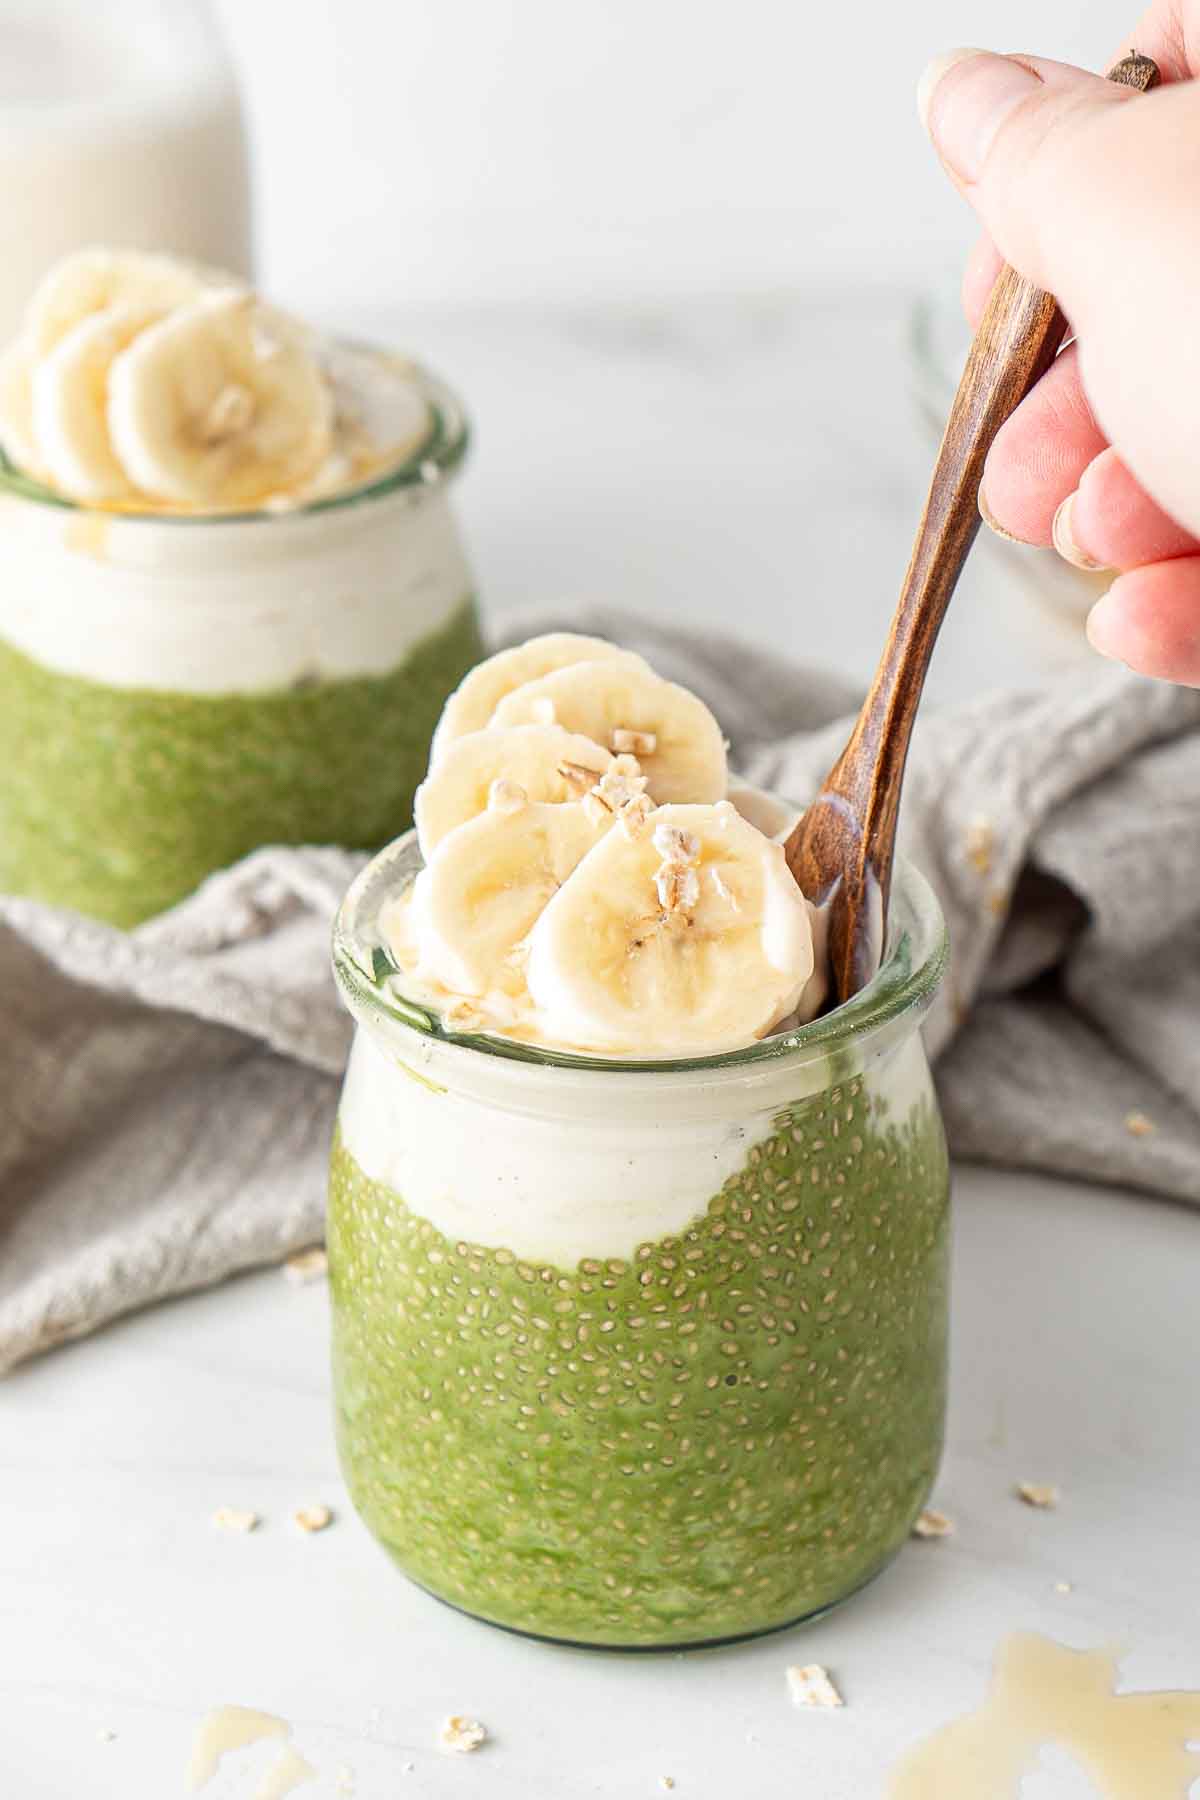 Matcha chia pudding with a wooden spoon taking a bite.